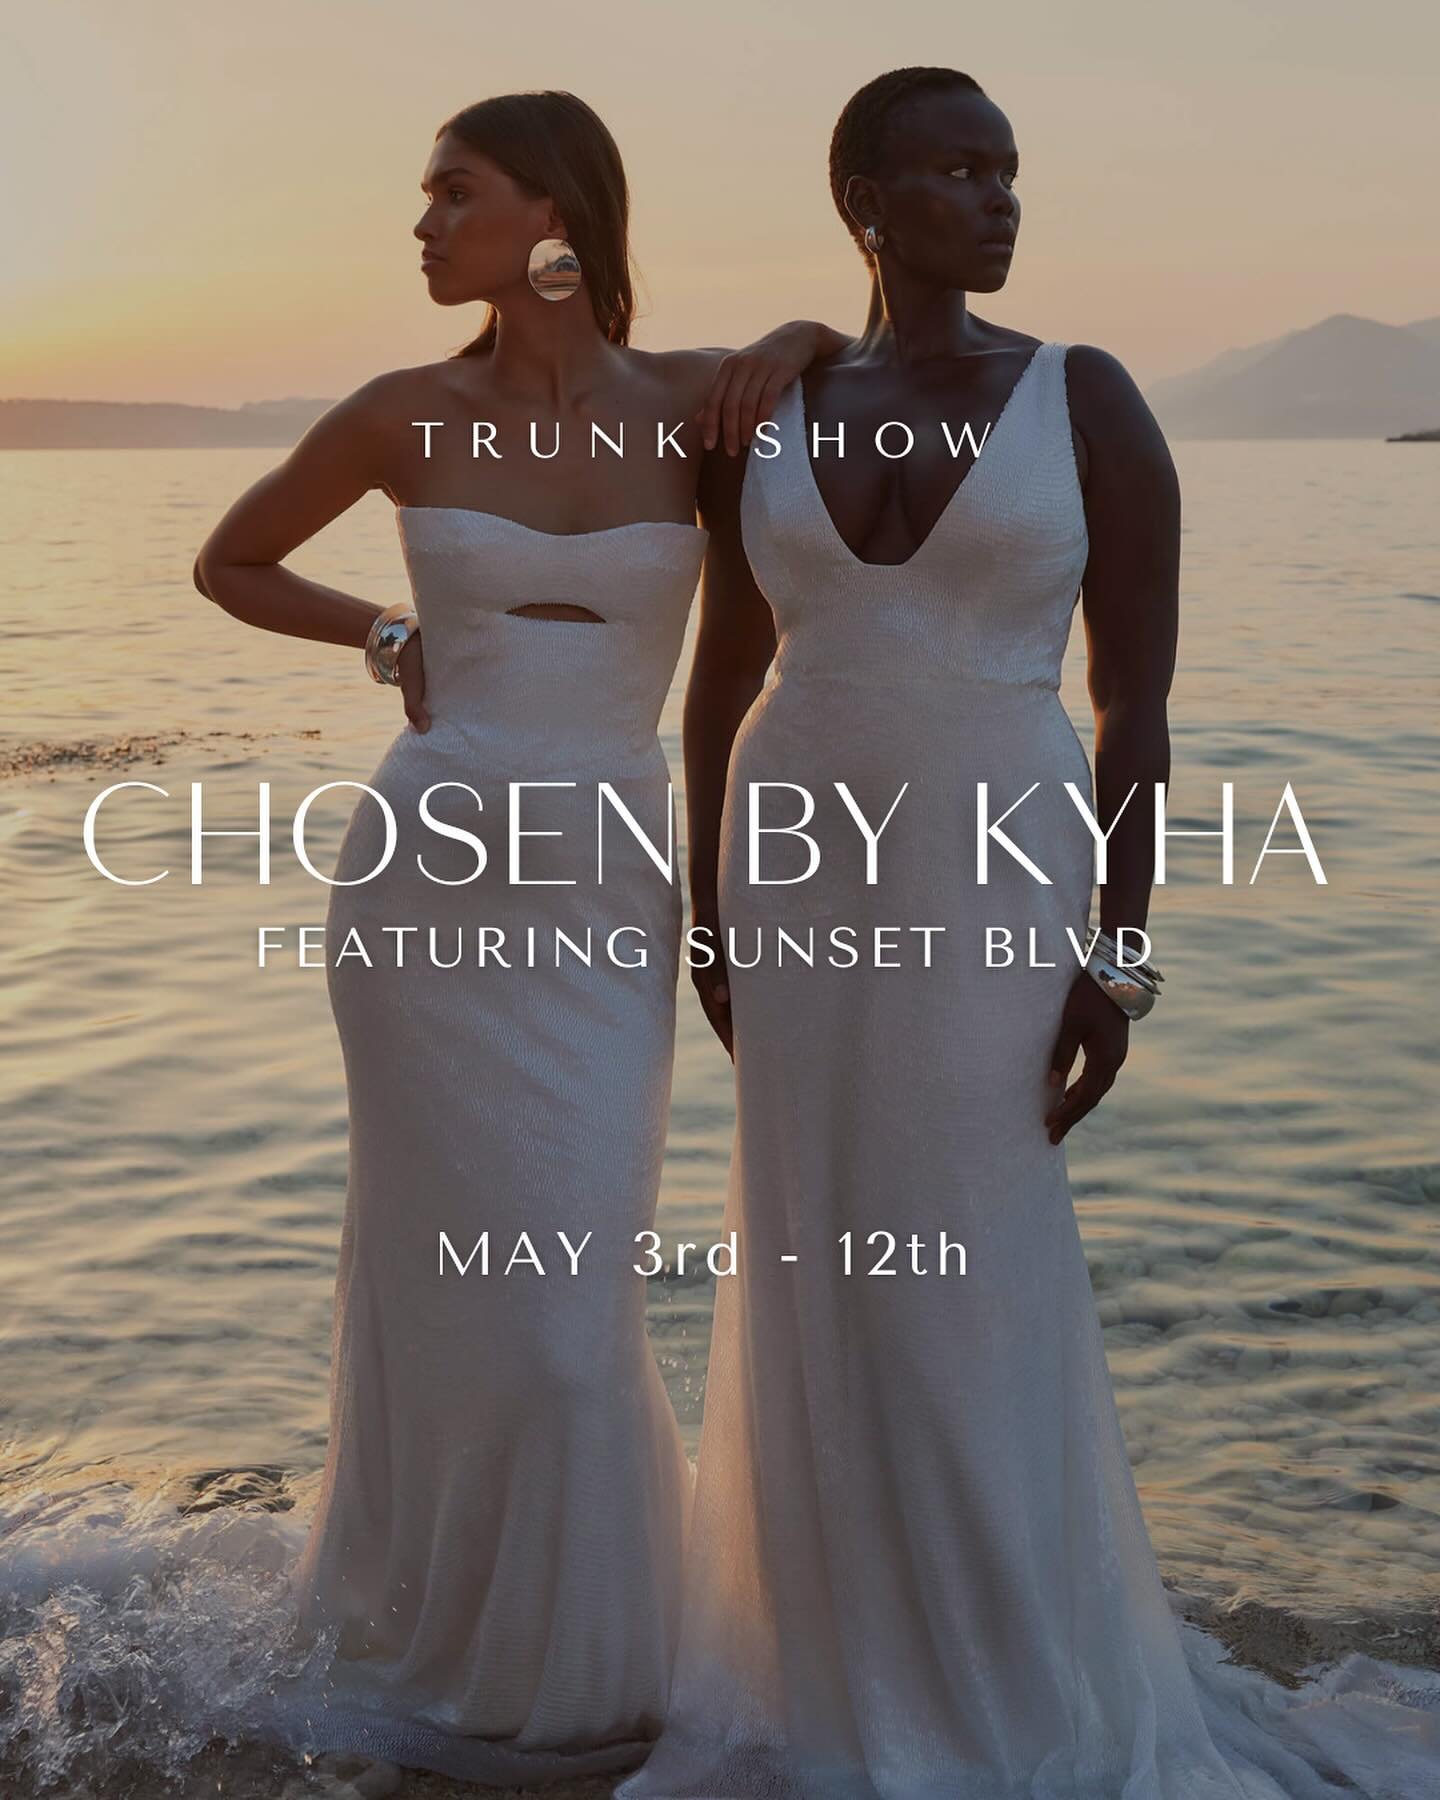 TRUNK SHOW The Sunset Blvd collection from @chosenbykyha will be with us in store from May 3rd - 12th. The collection boasts the sleek minimalism and fashion forward detailing that we have come to know and love, empowering non-traditional brides to s